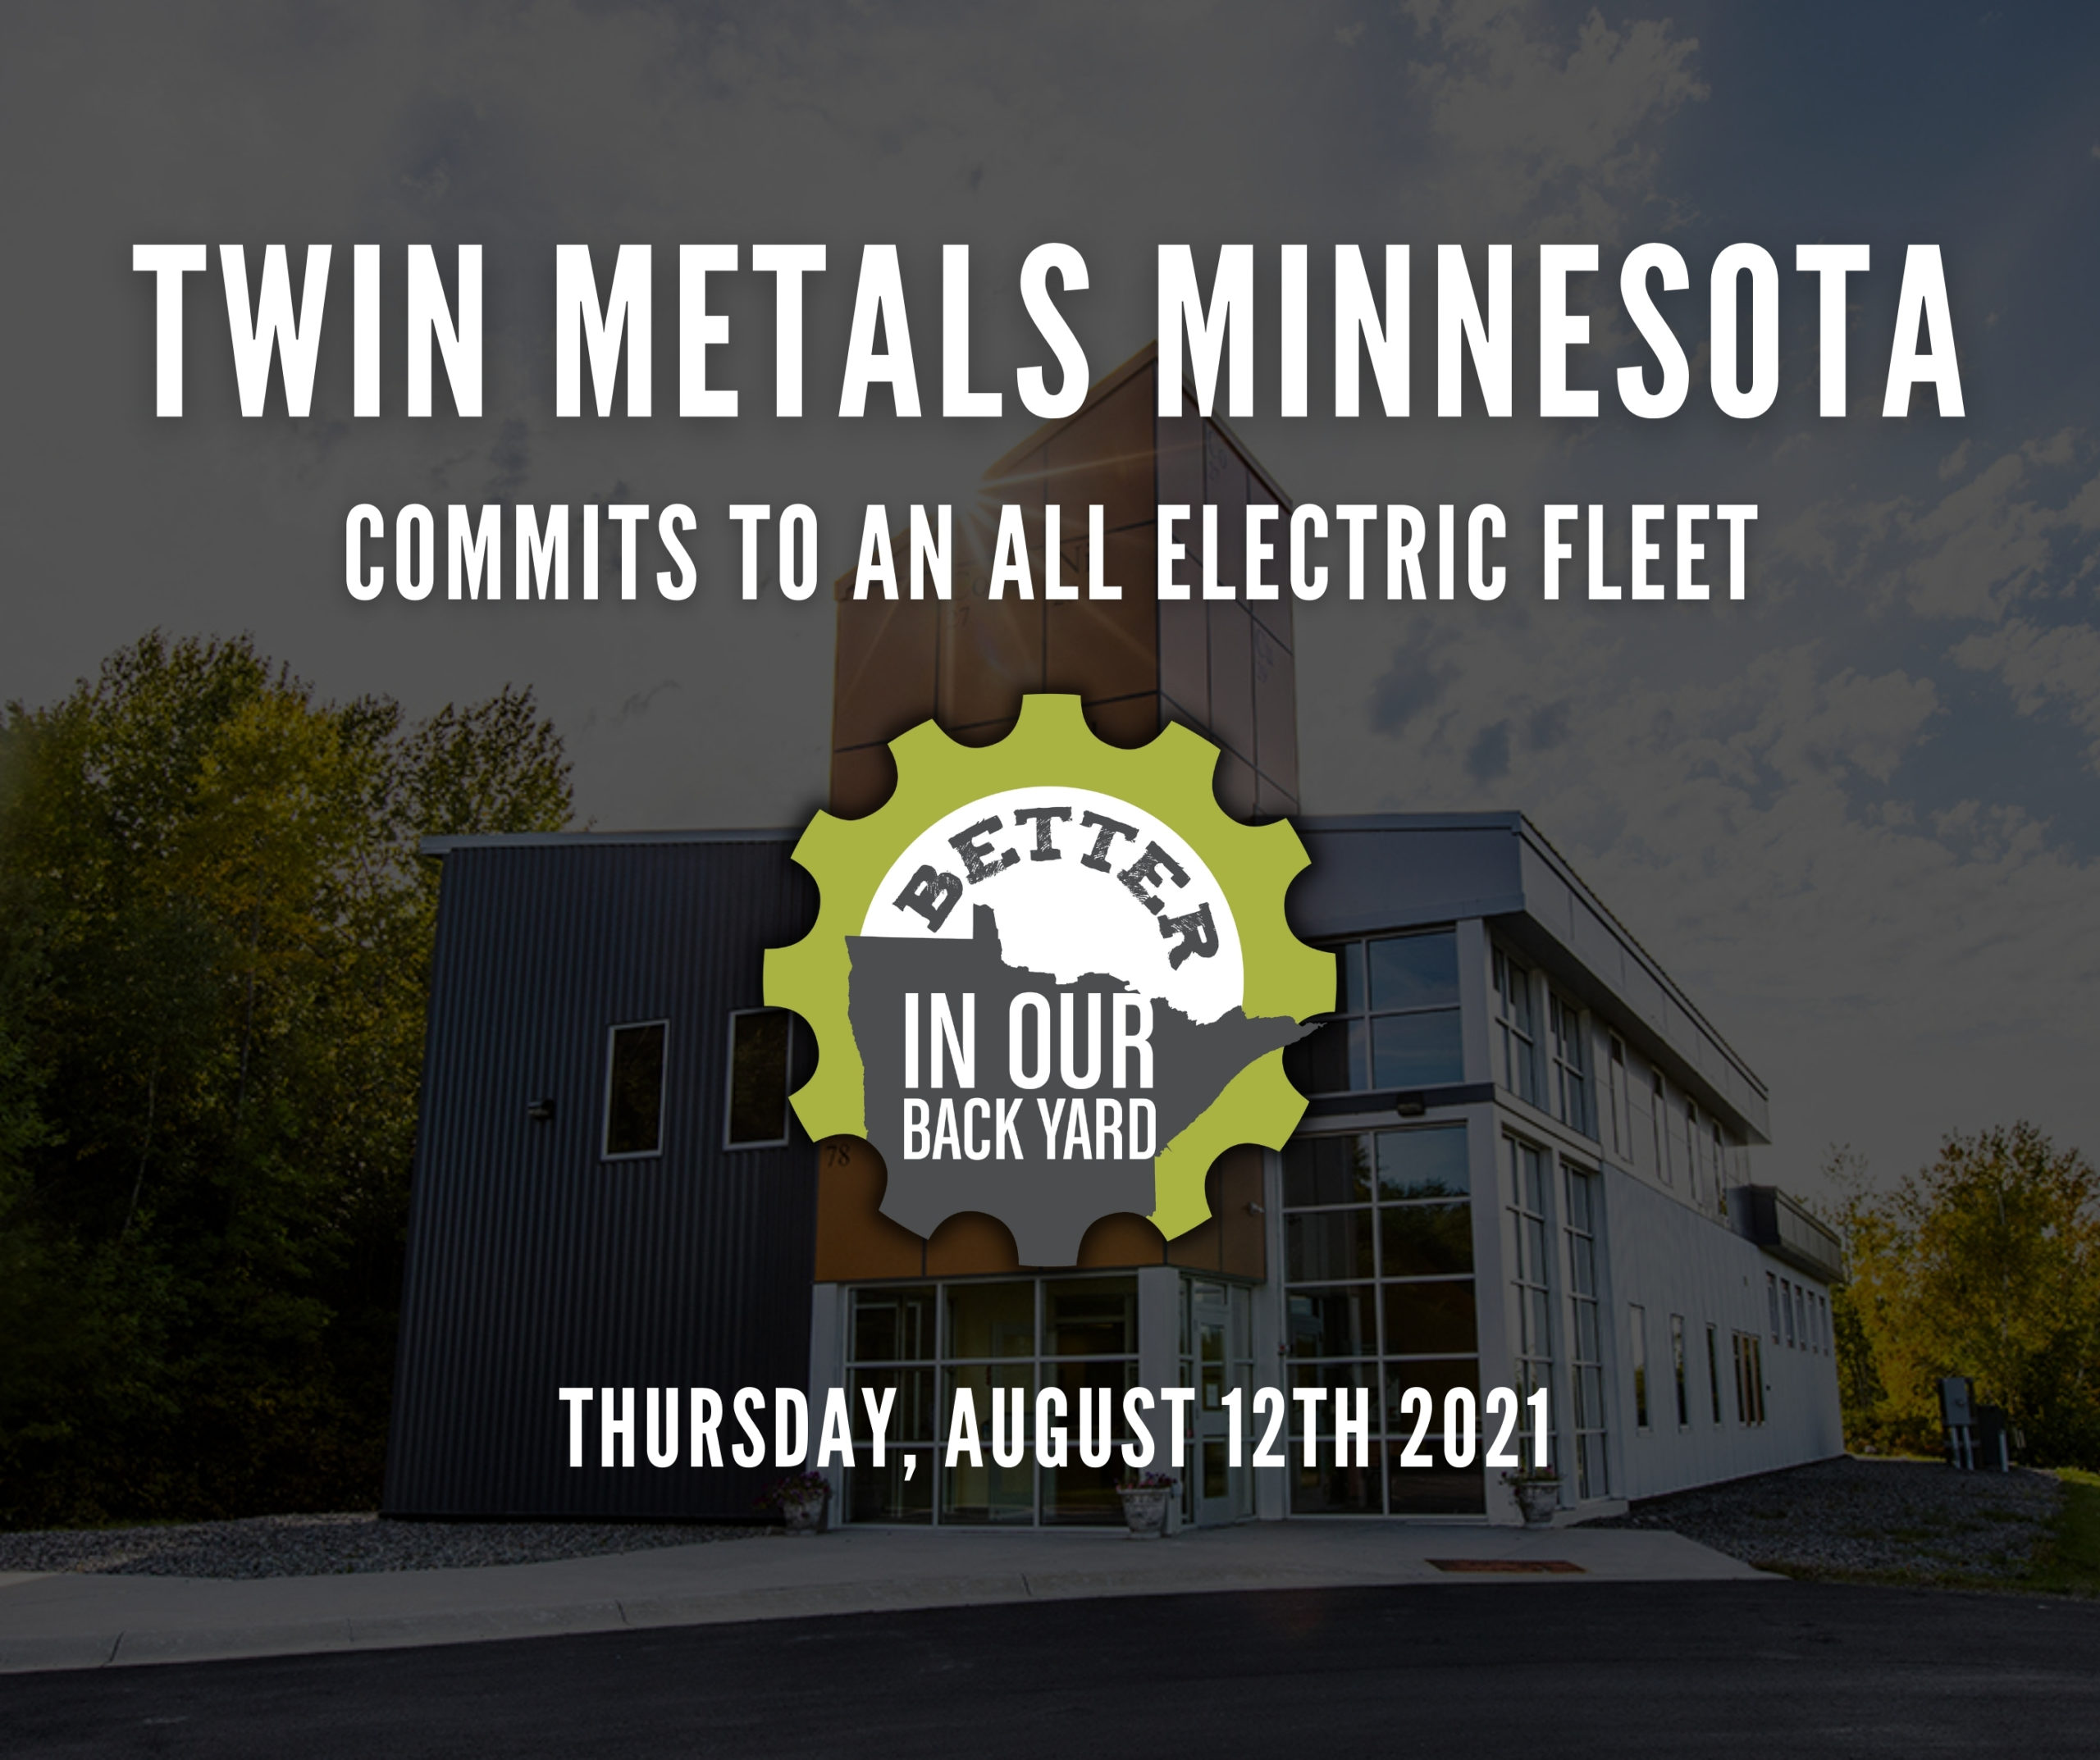 TWIN METALS COMMITS TO ELECTRIC VEHICLES